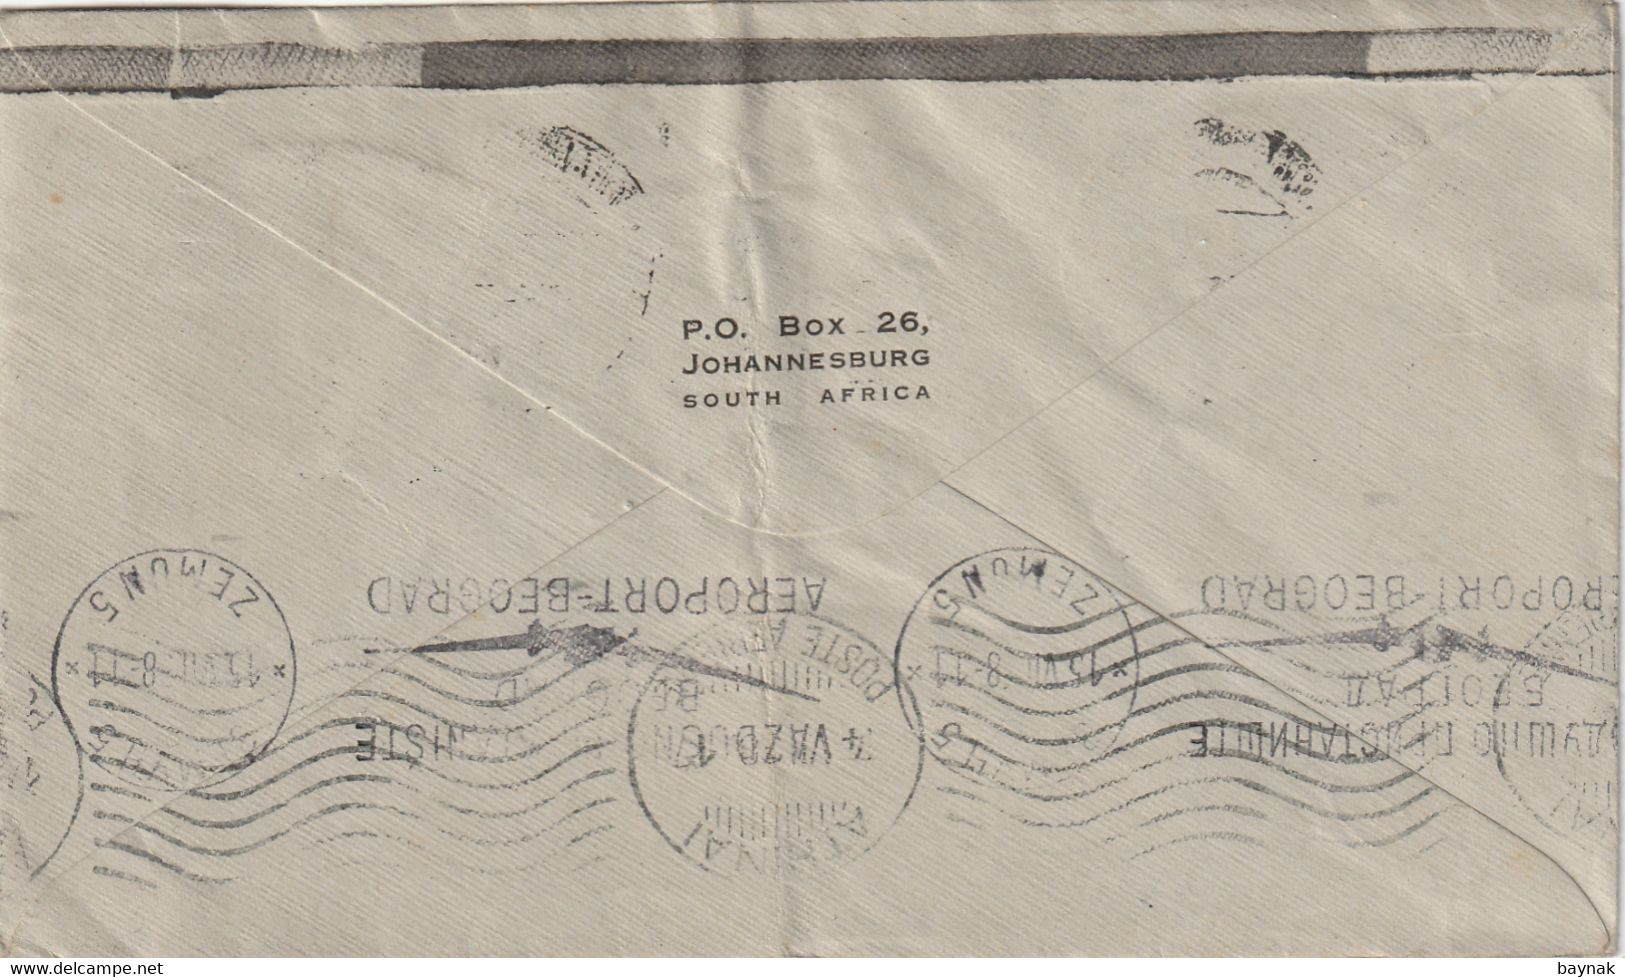 SOUTH   AFRICA  --  BRIEF  --   BY AIR MAIL  --   1938  --  JOHANNESBURG  TO ZAGREB, CROATIA - Airmail